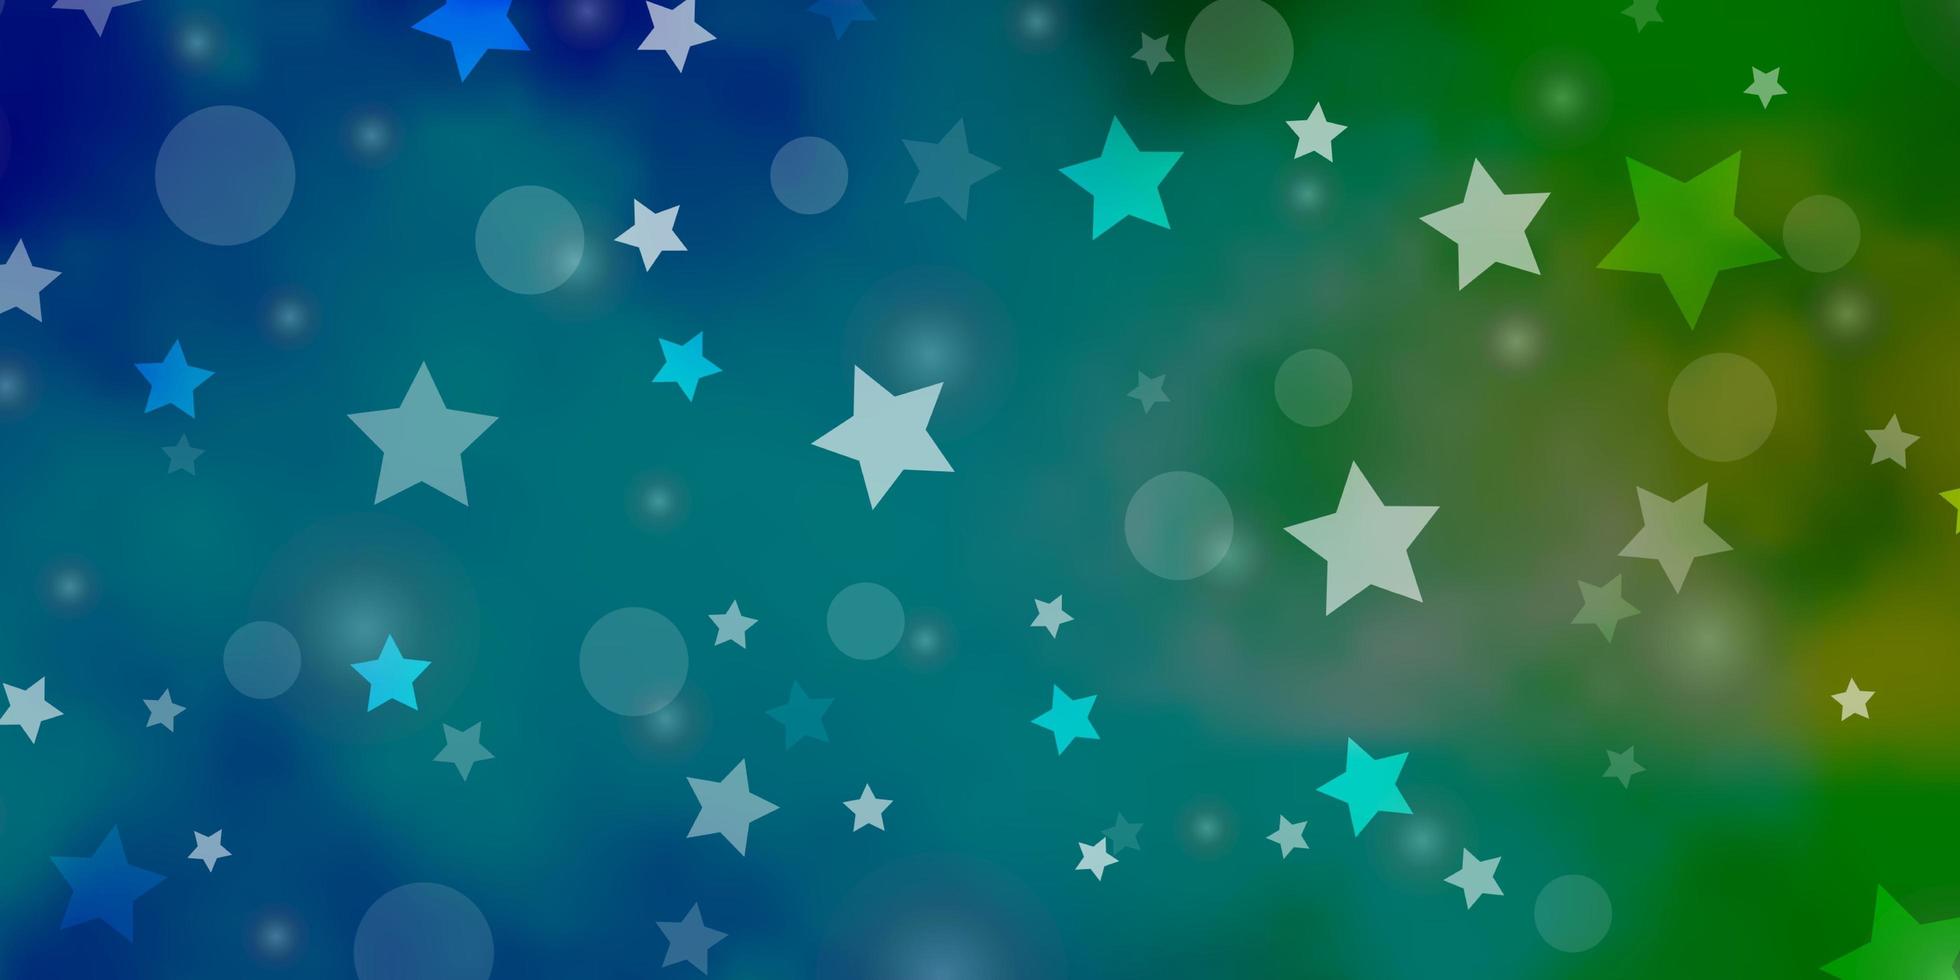 Light Blue, Green vector template with circles, stars. Abstract illustration with colorful spots, stars. Template for business cards, websites.